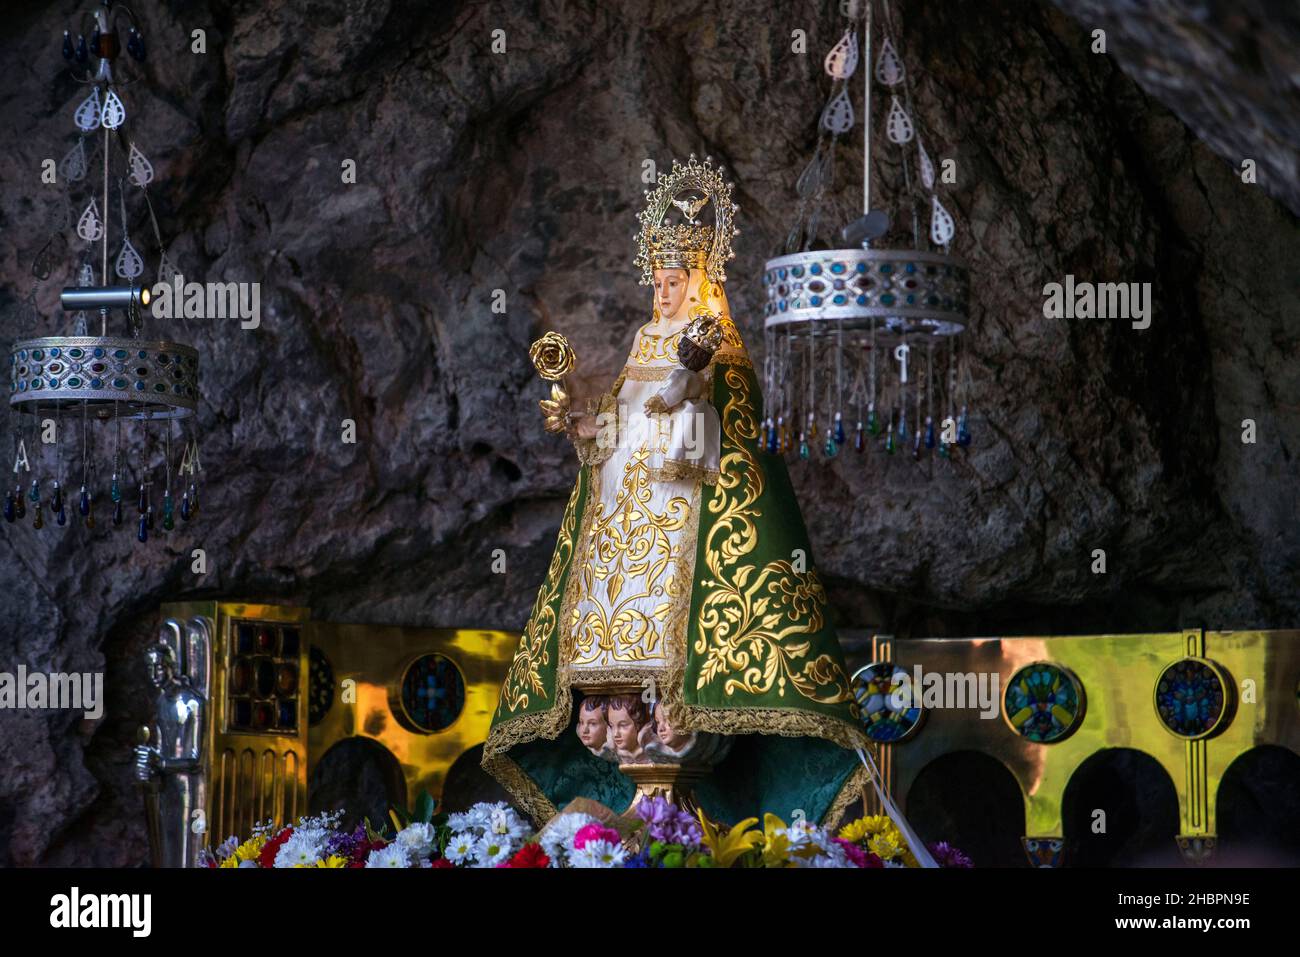 Our Lady of Covadonga. The Blessed Virgin Mary, and a Marian shrine devoted to her at Basílica de Santa María la Real de Covadonga catholic church in Stock Photo